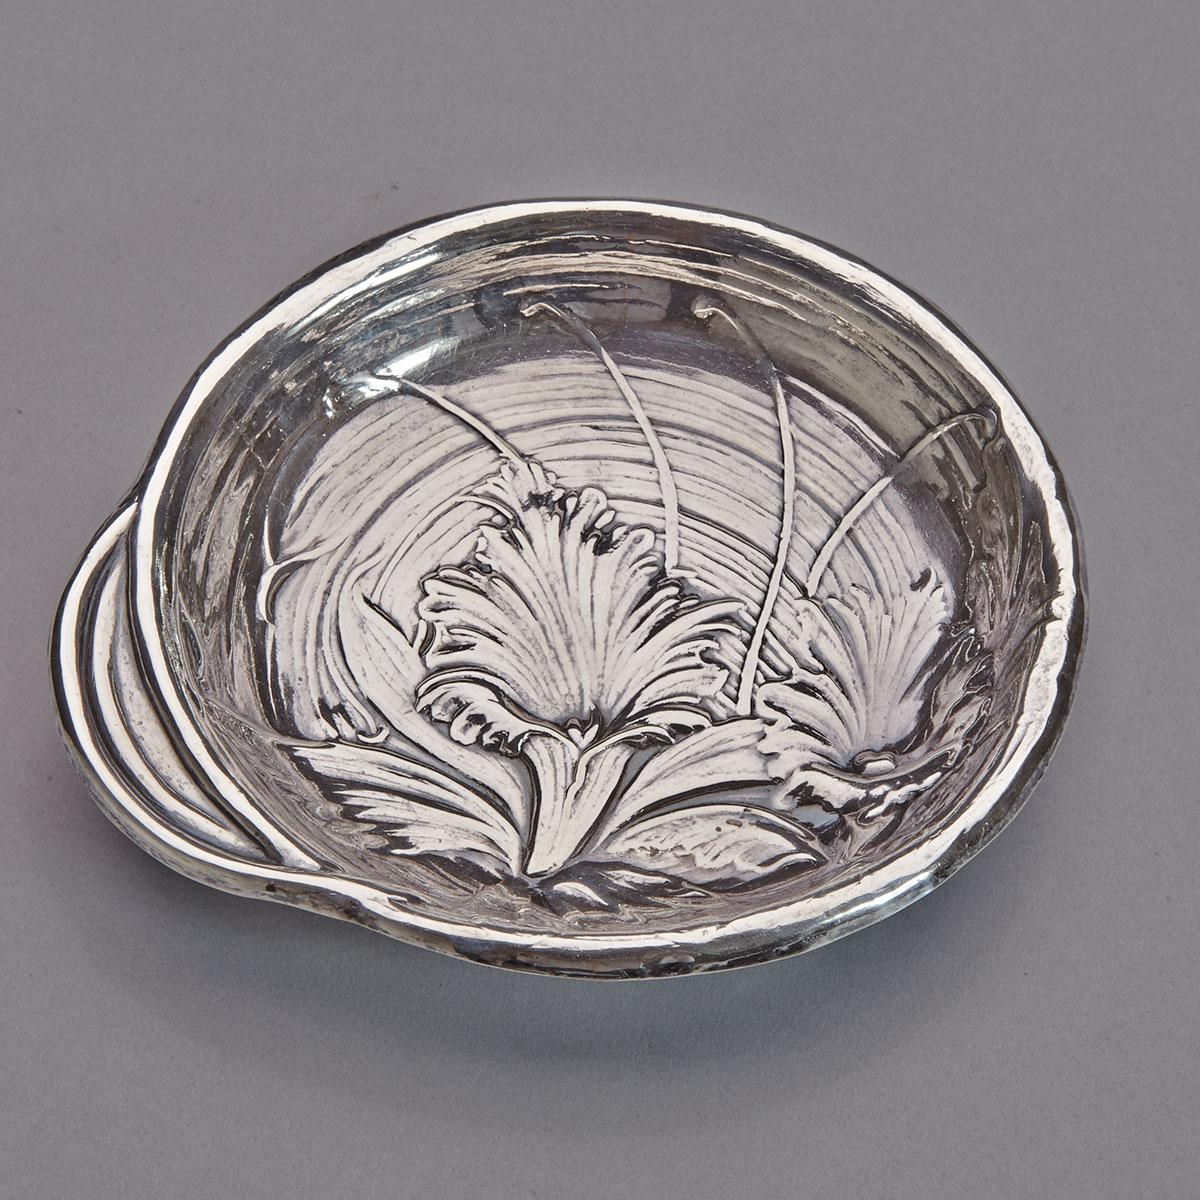 Canadian Silver Small Serving Dish, Henry Birks & Sons, Montreal, Que., early 20th century